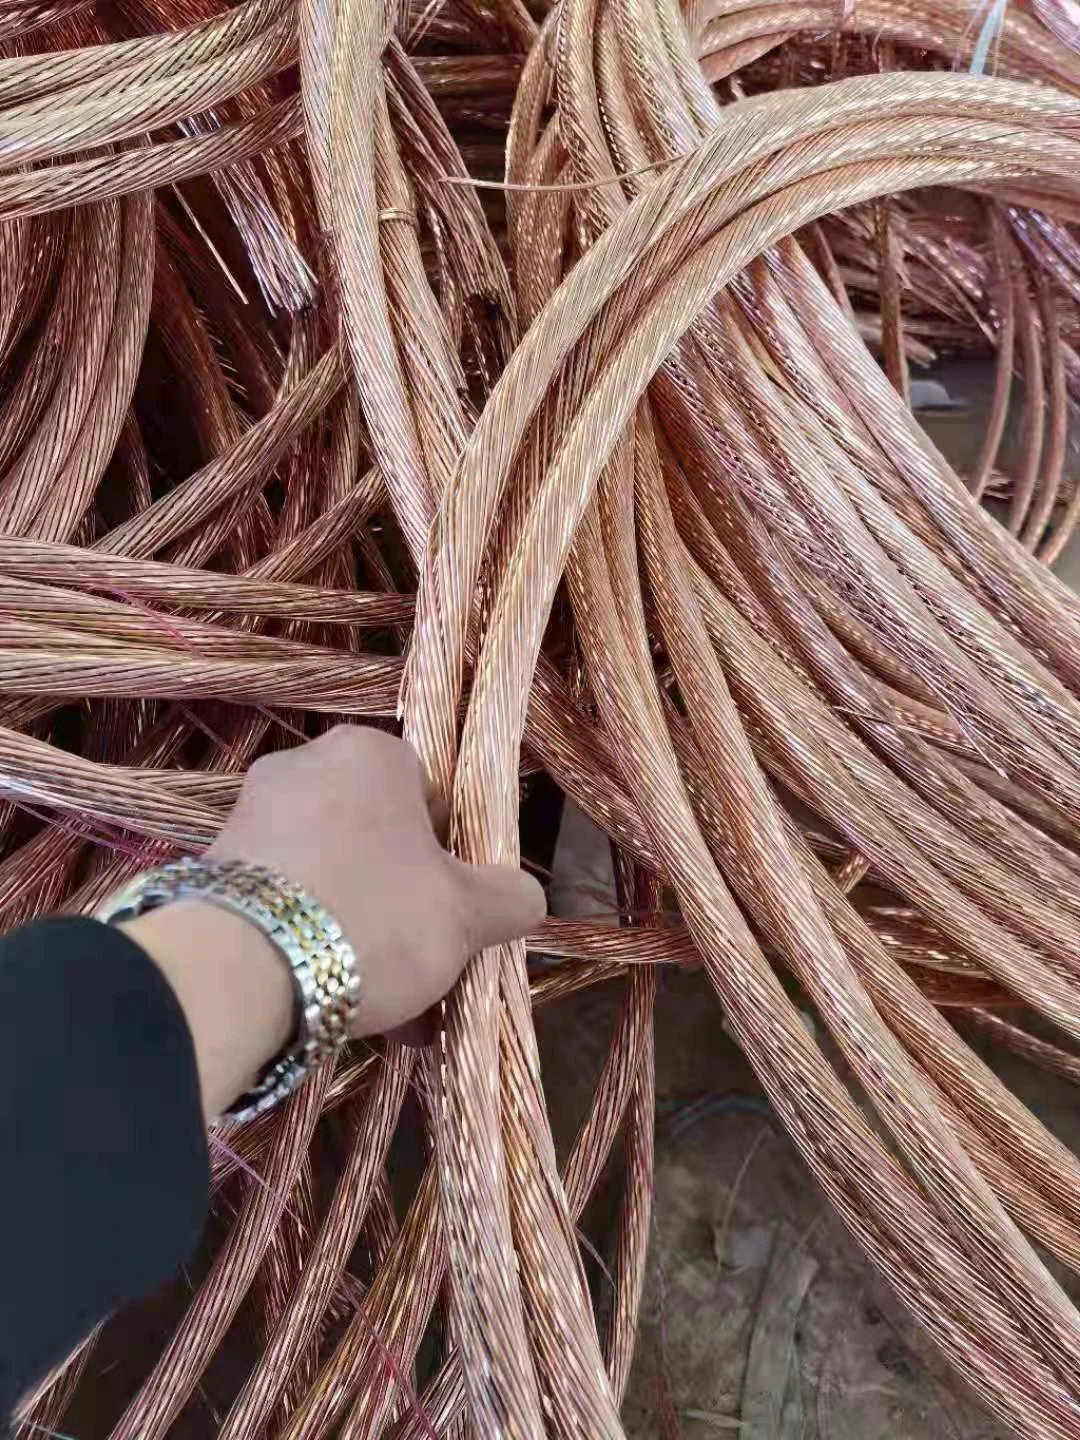 Excellent Property Copper Wire Scrap in Stock